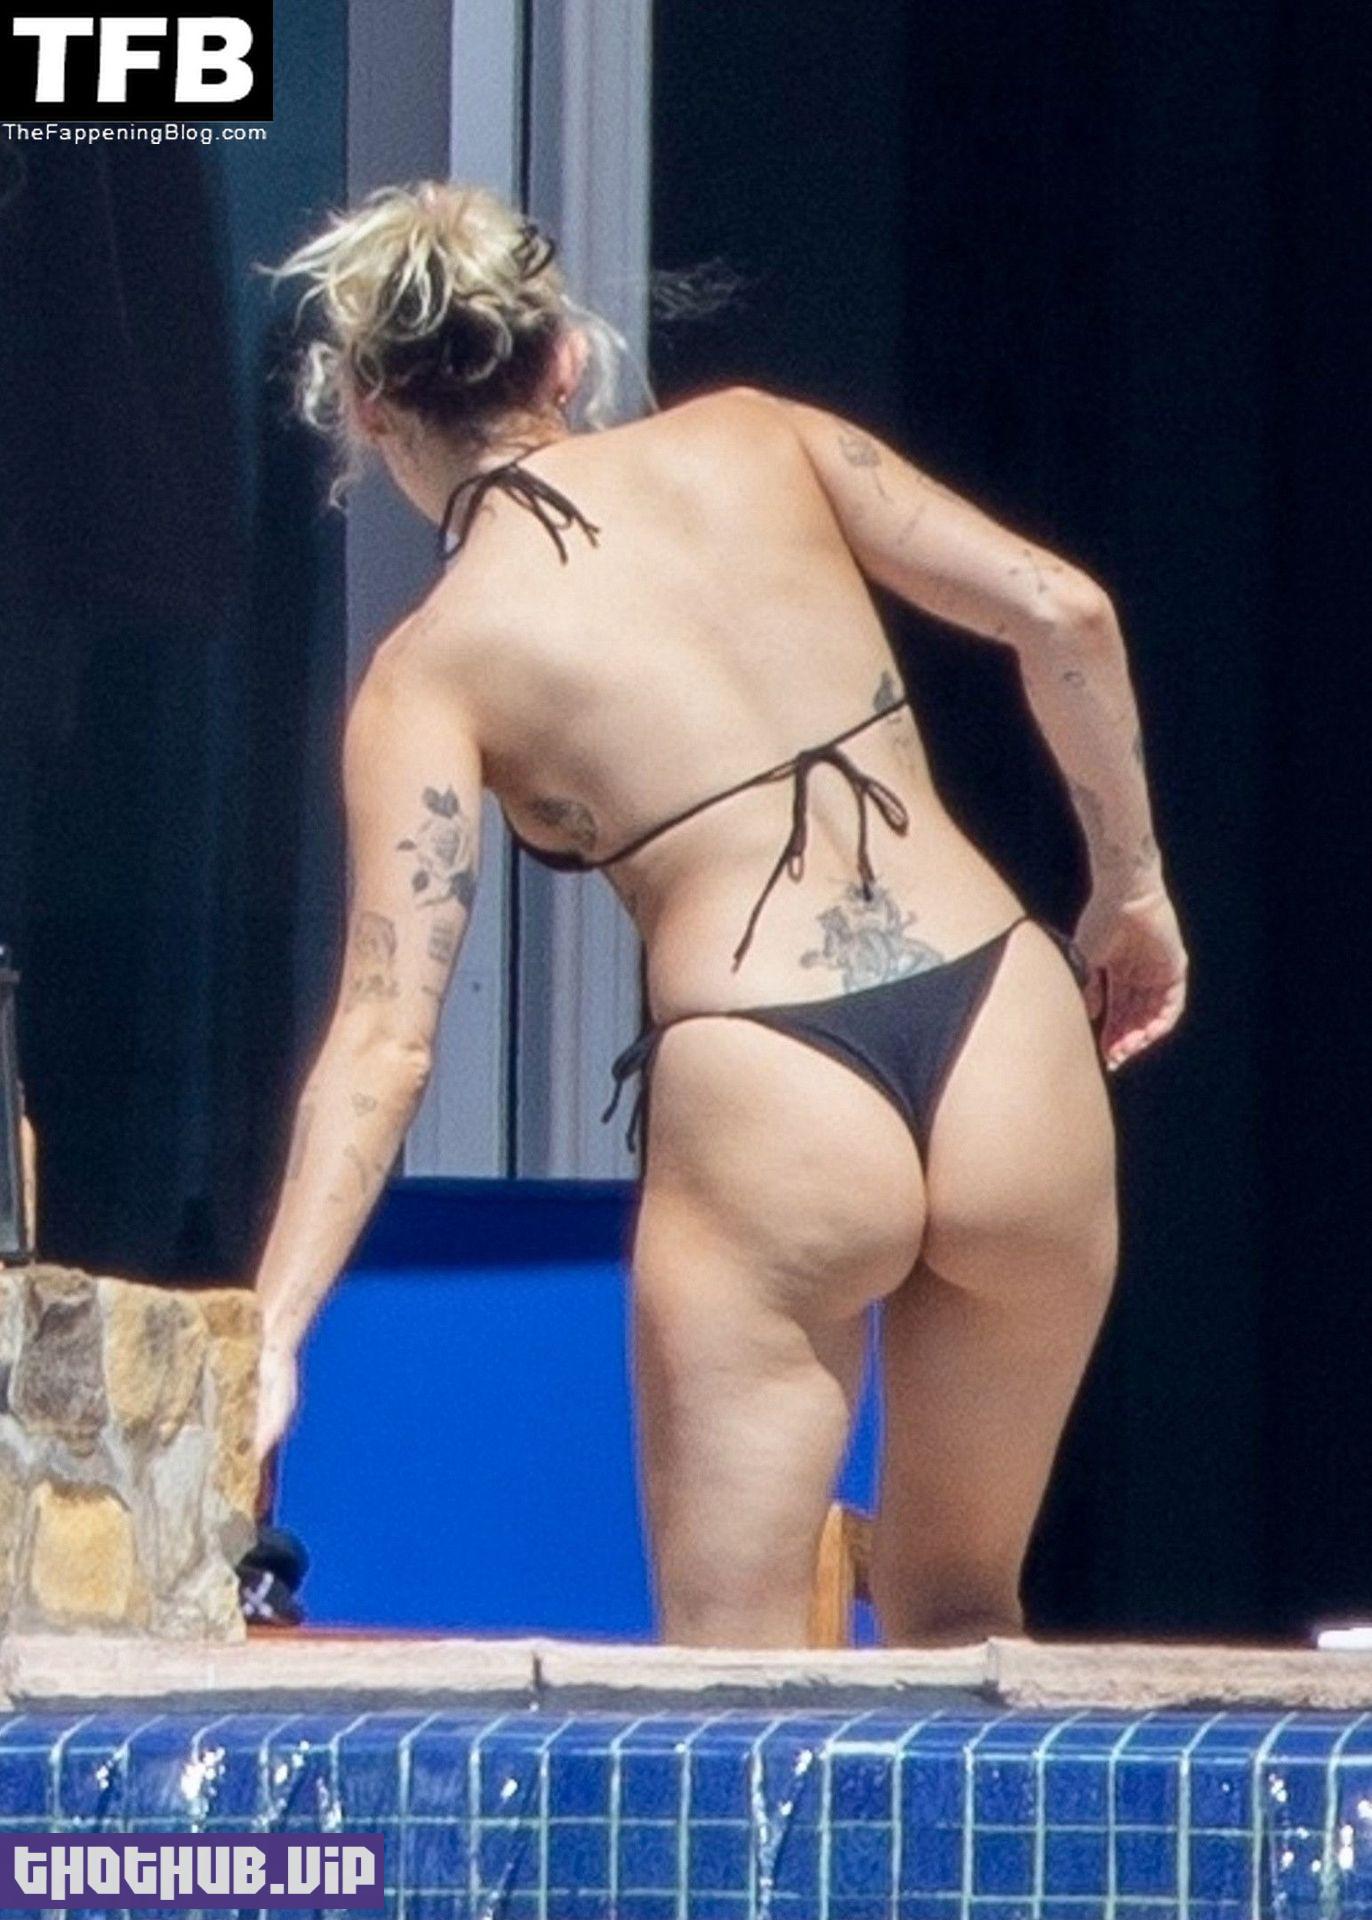 miley cyrus leaked 776332 thefappeningblog.com